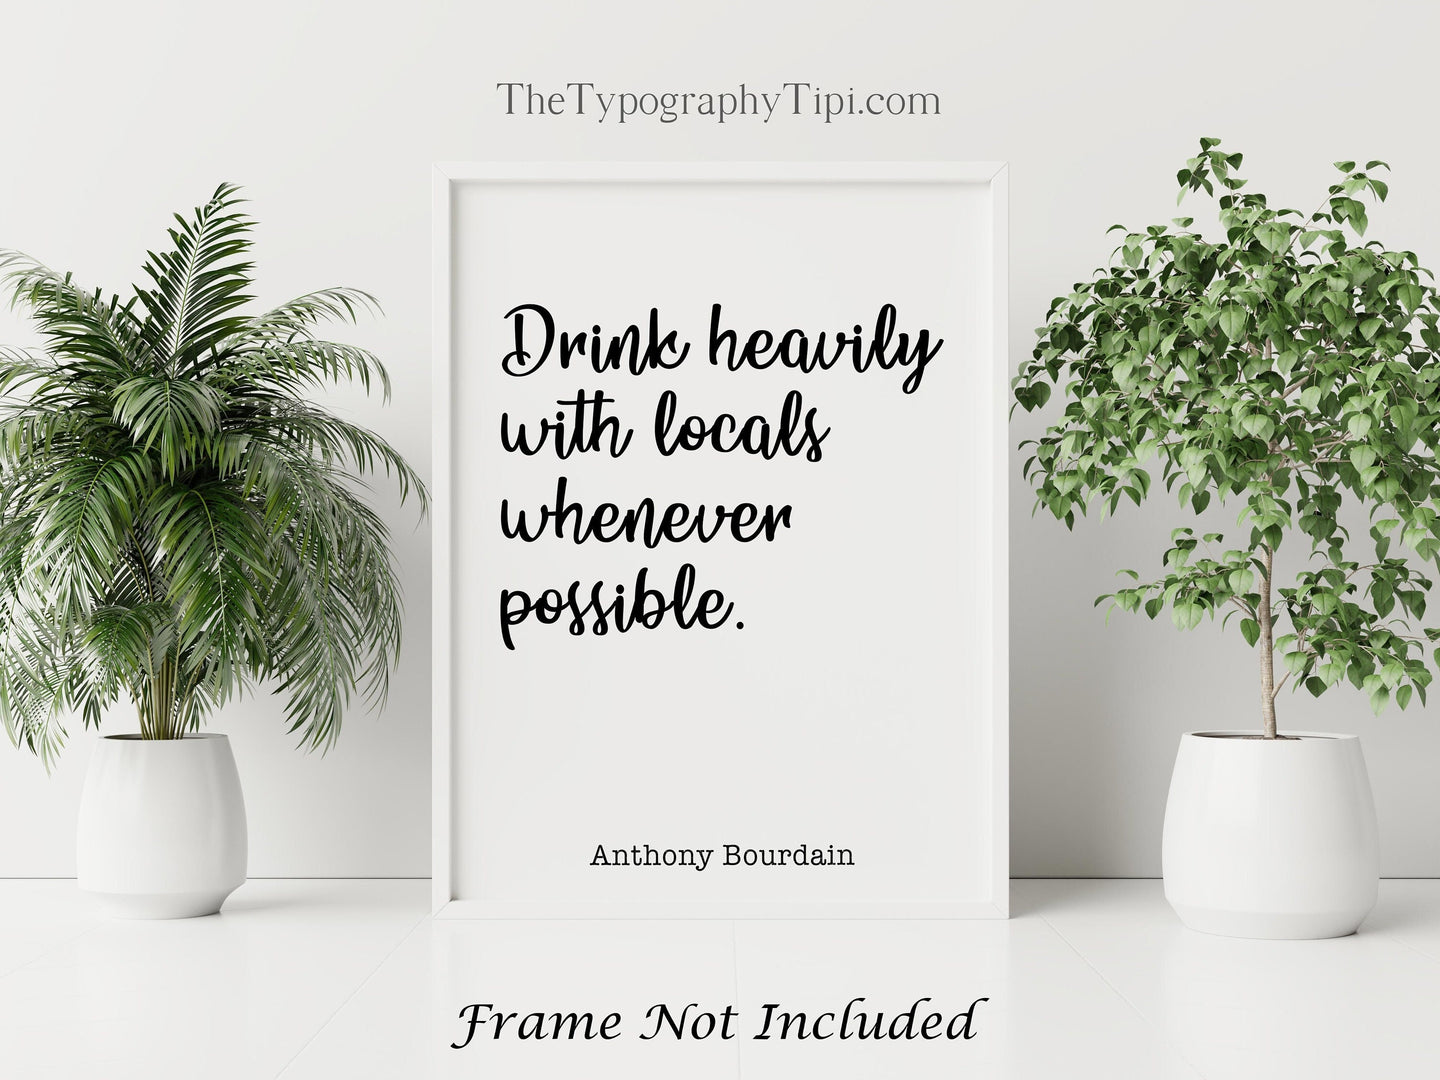 Anthony Bourdain Print - Drink heavily with locals whenever possible - Unframed inspirational print for Home, Inspirational bourdain quote